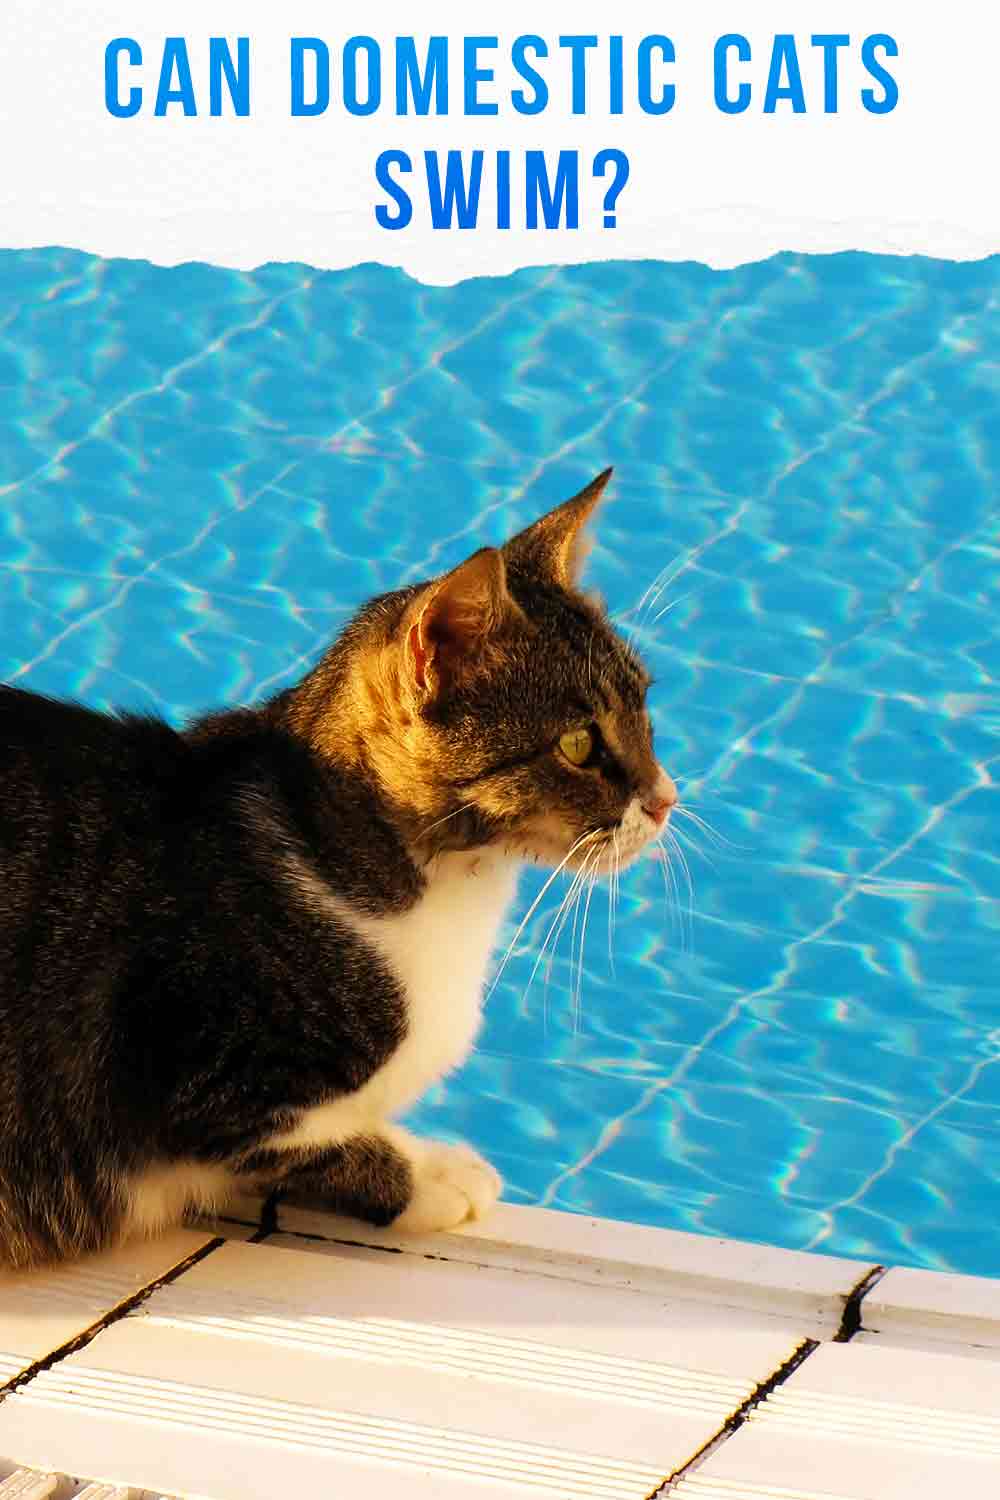 Can Cats Swim? Breaking Down The Myths About Cats And Water